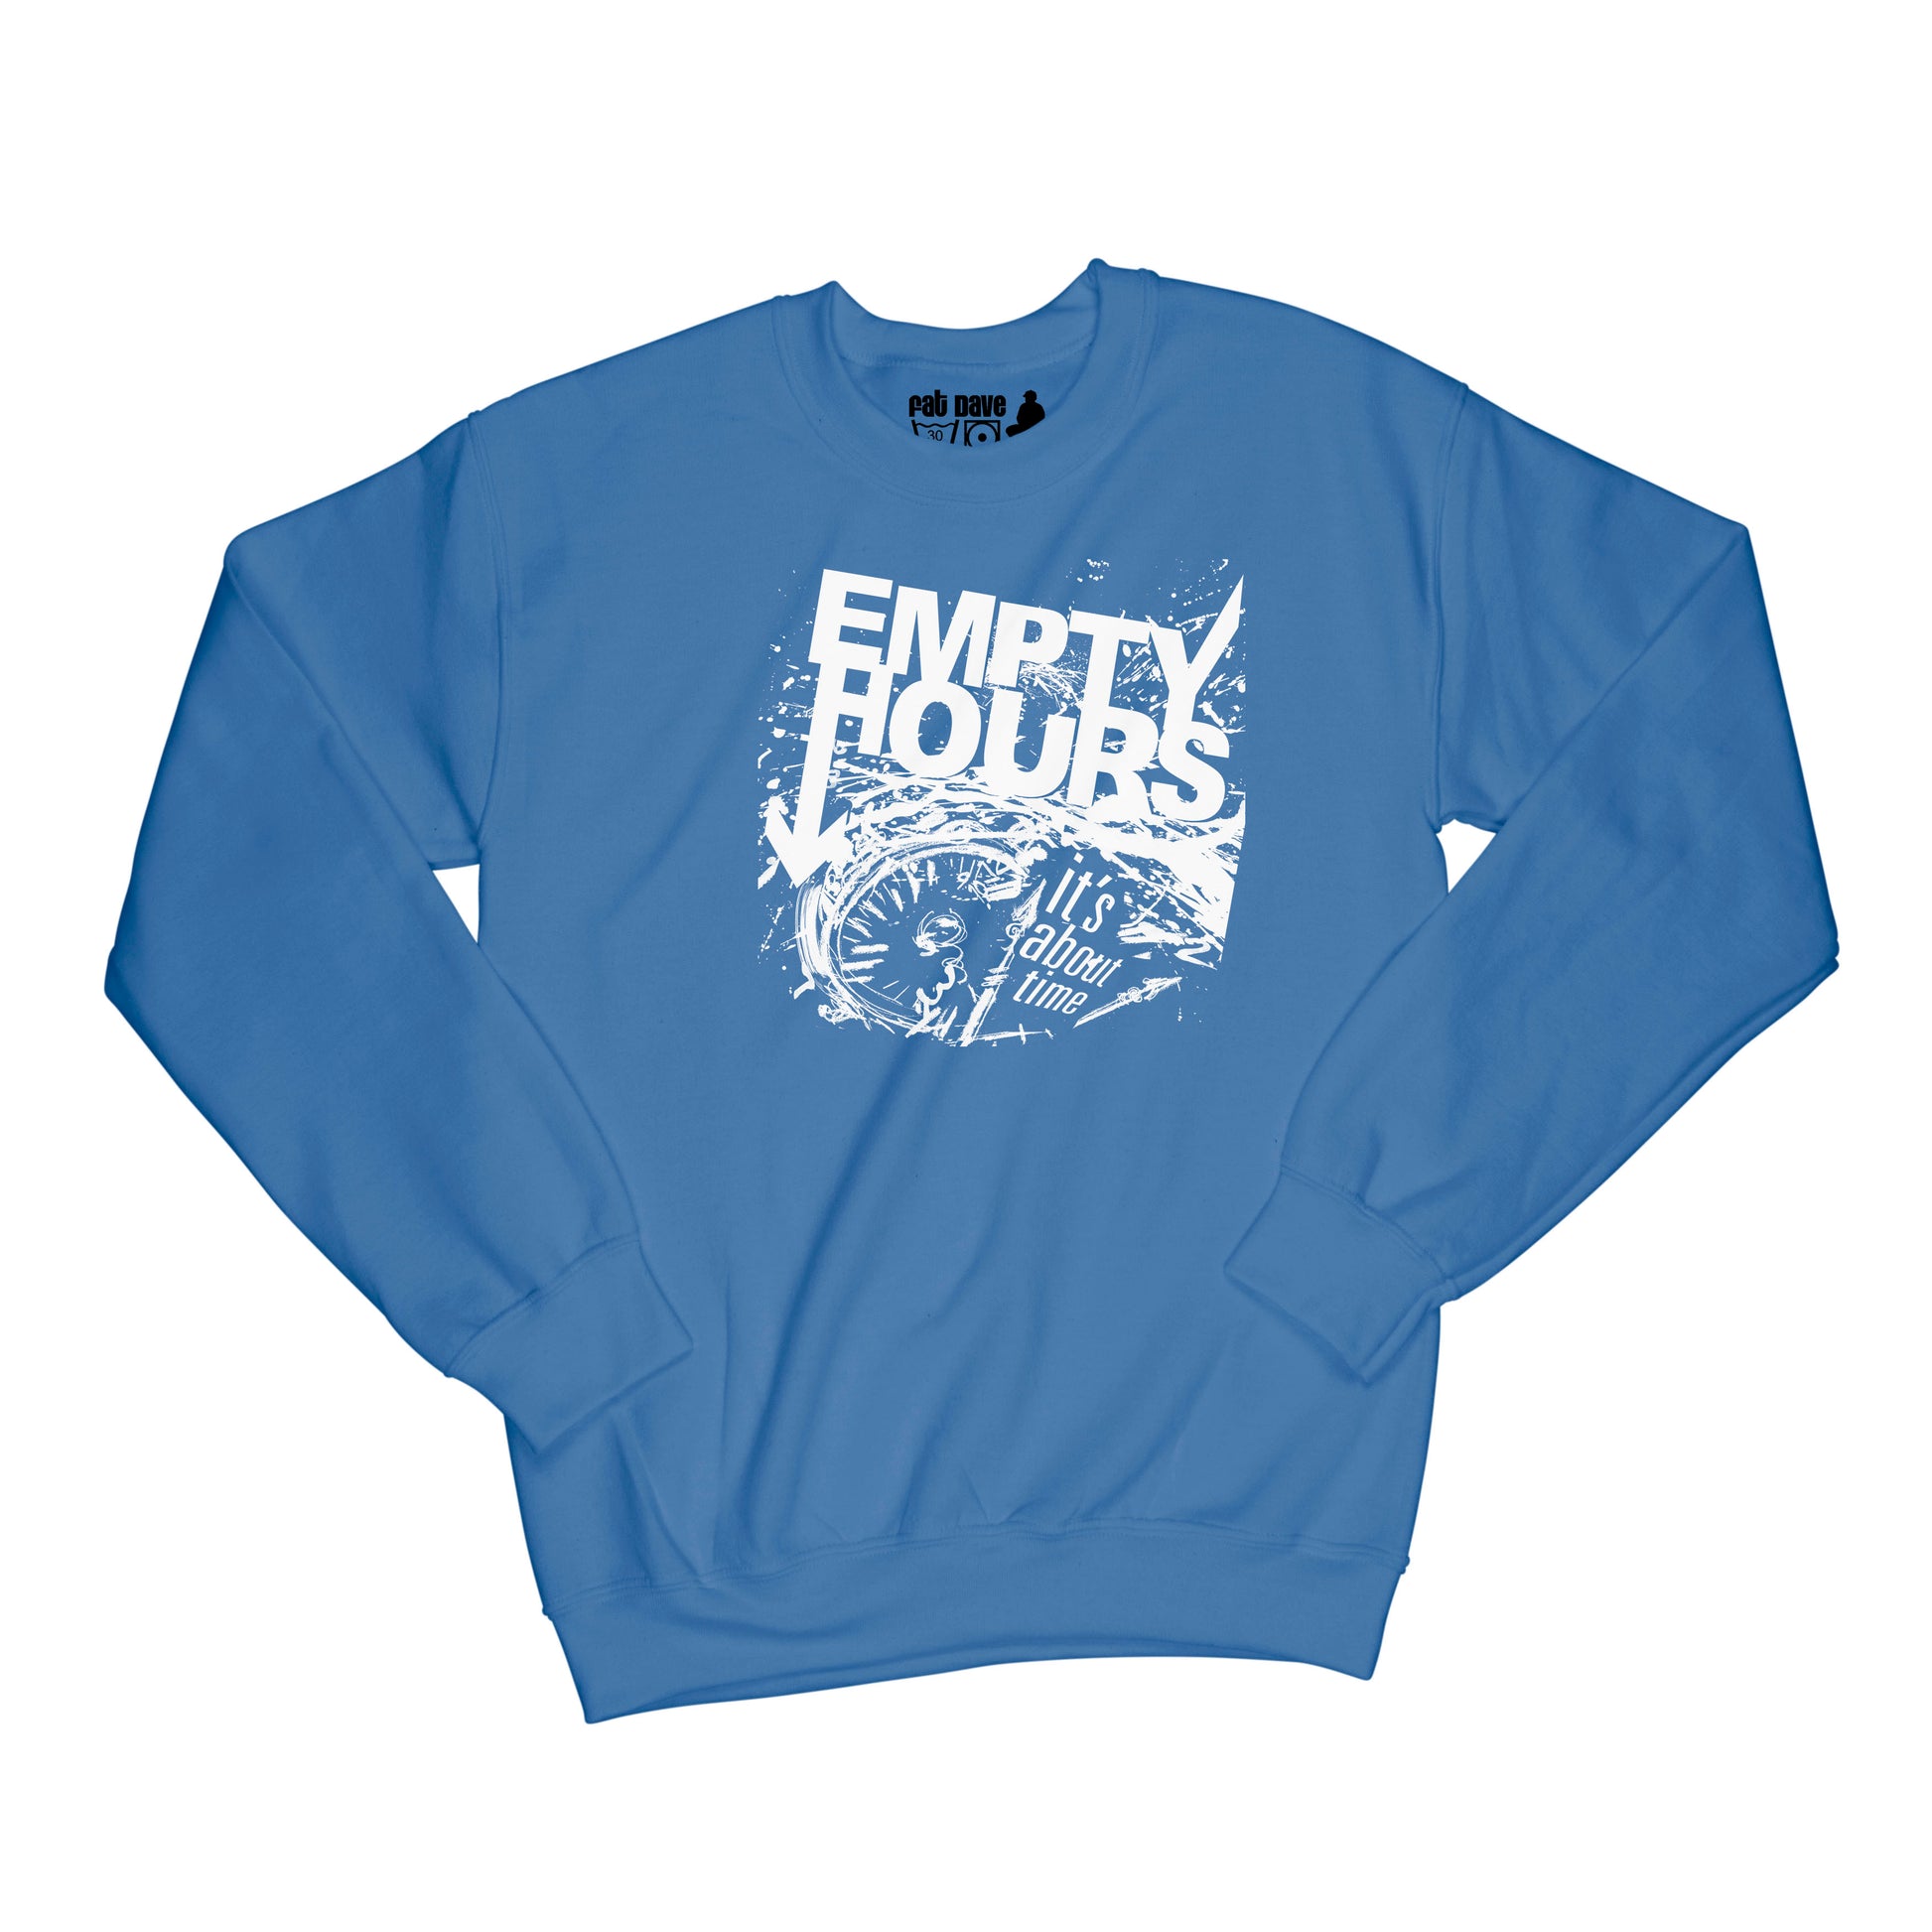 Brantford, Empty Hours, Fat Dave, It's About Time album cover, Musician, Sweatshirt, Royal Blue/White